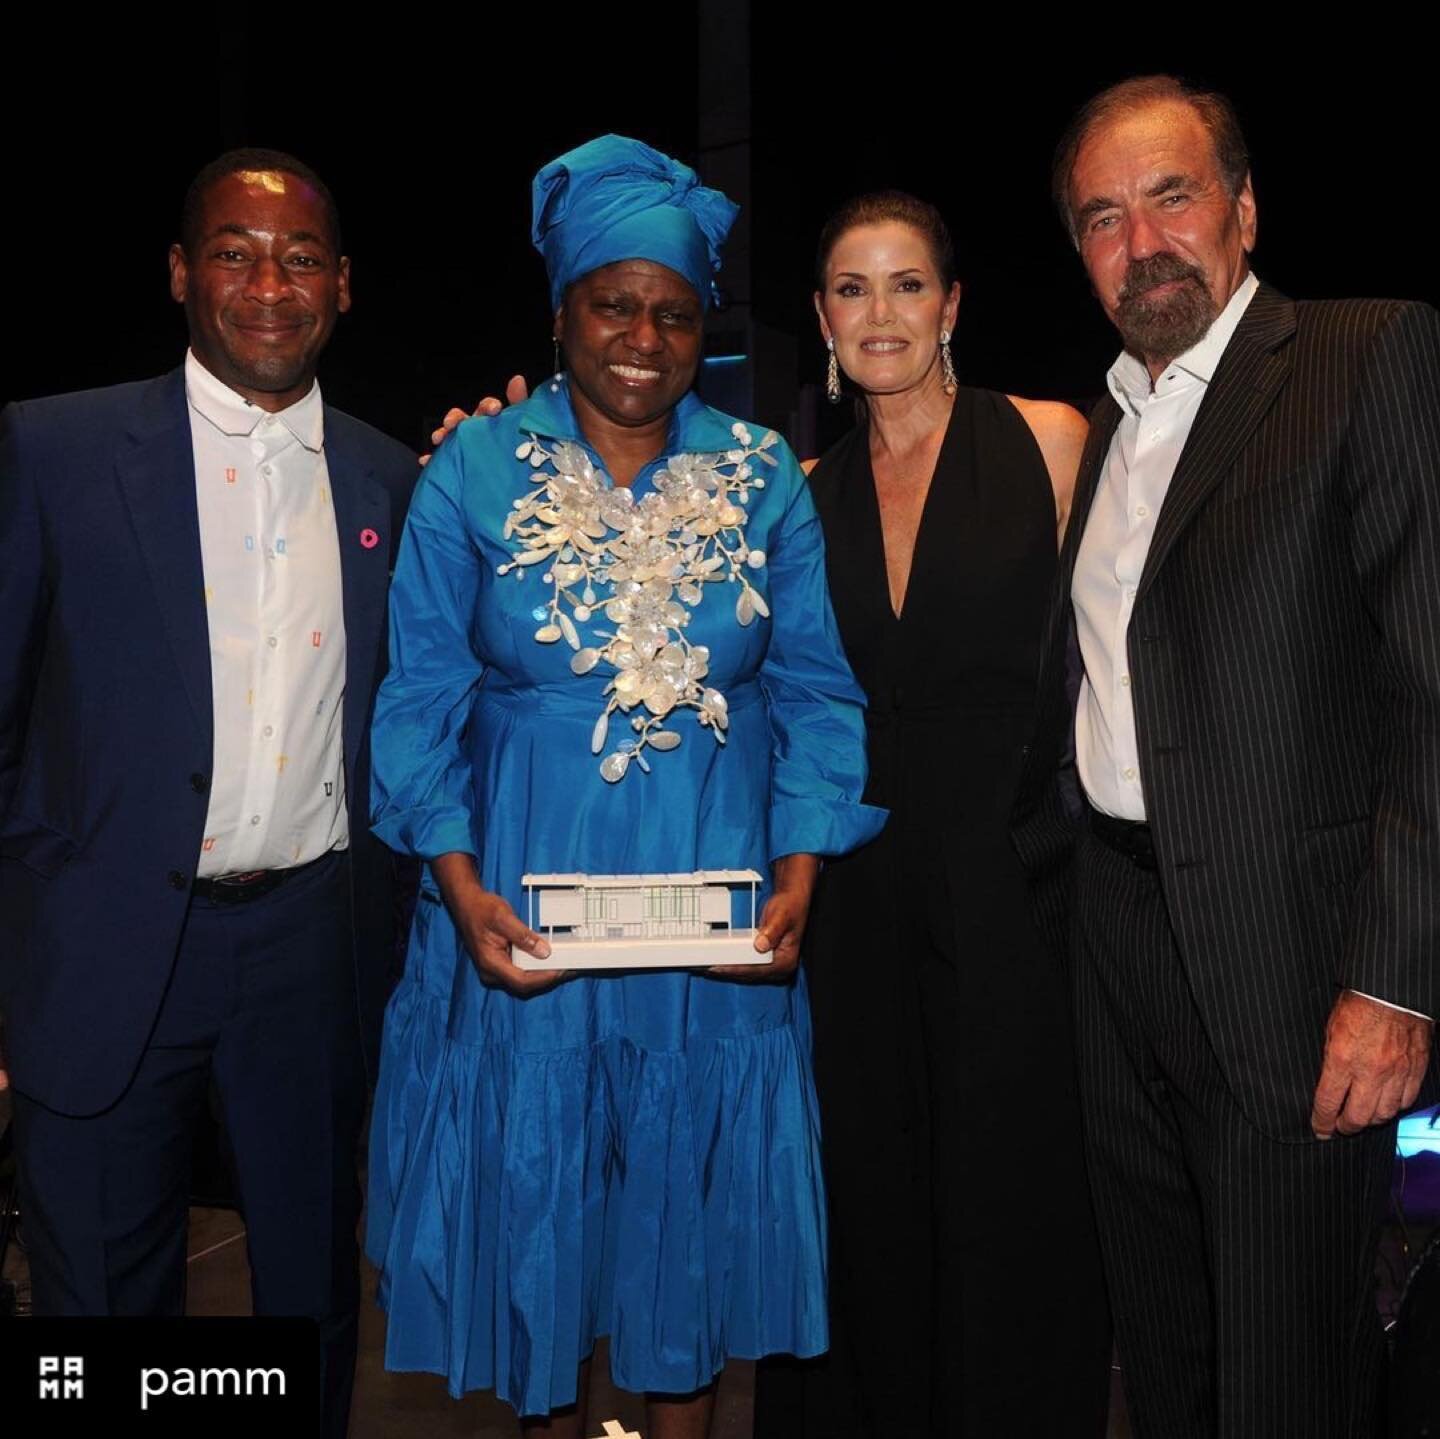 Posted @withregram

This past Saturday, April 17, our lead creative, Mar&iacute;a Magdalena Campos-Pons was awarded the 2021 P&eacute;rez Prize by the P&eacute;rez Art Museum Miami. 

More info via @pamm - The P&eacute;rez Prize is an unrestricted aw